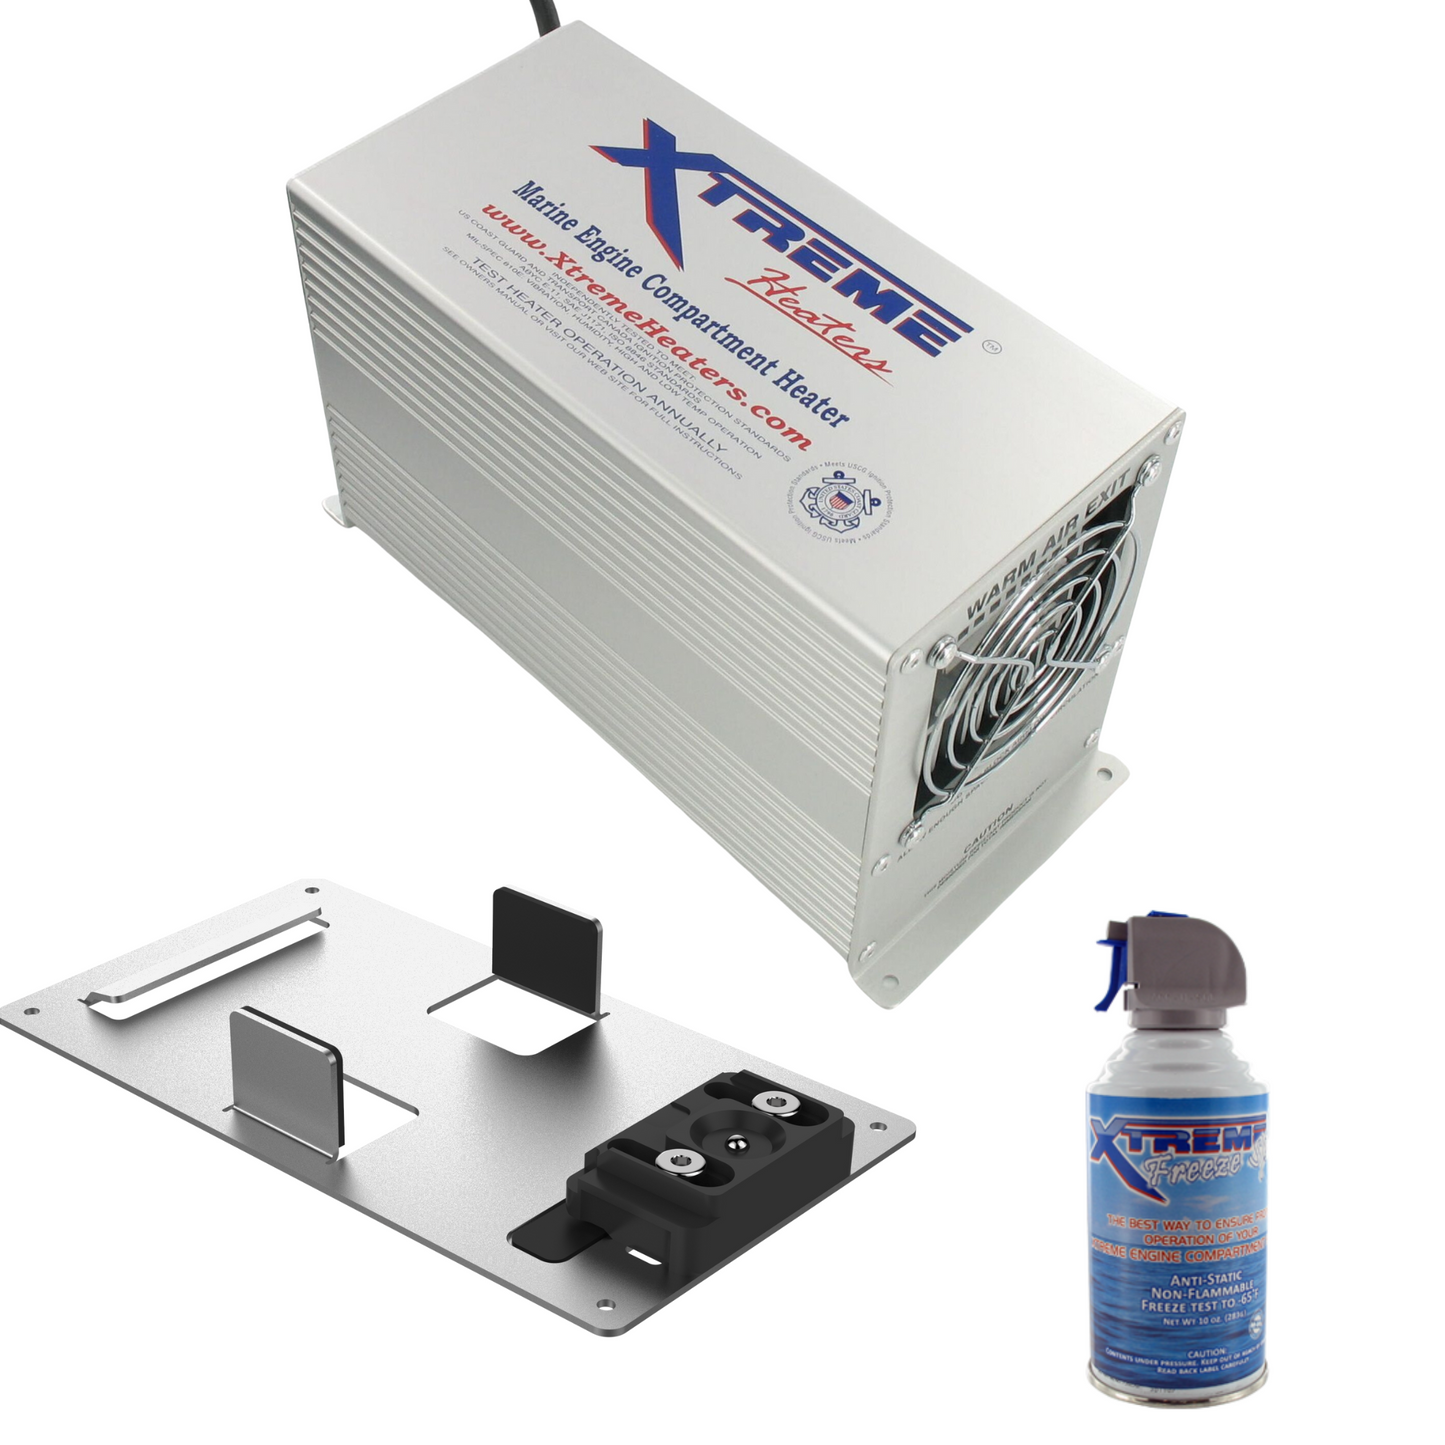 Single-Xtreme-Heater-with-Bracket-and-freeze-spray-for-testing-bilge-heaters